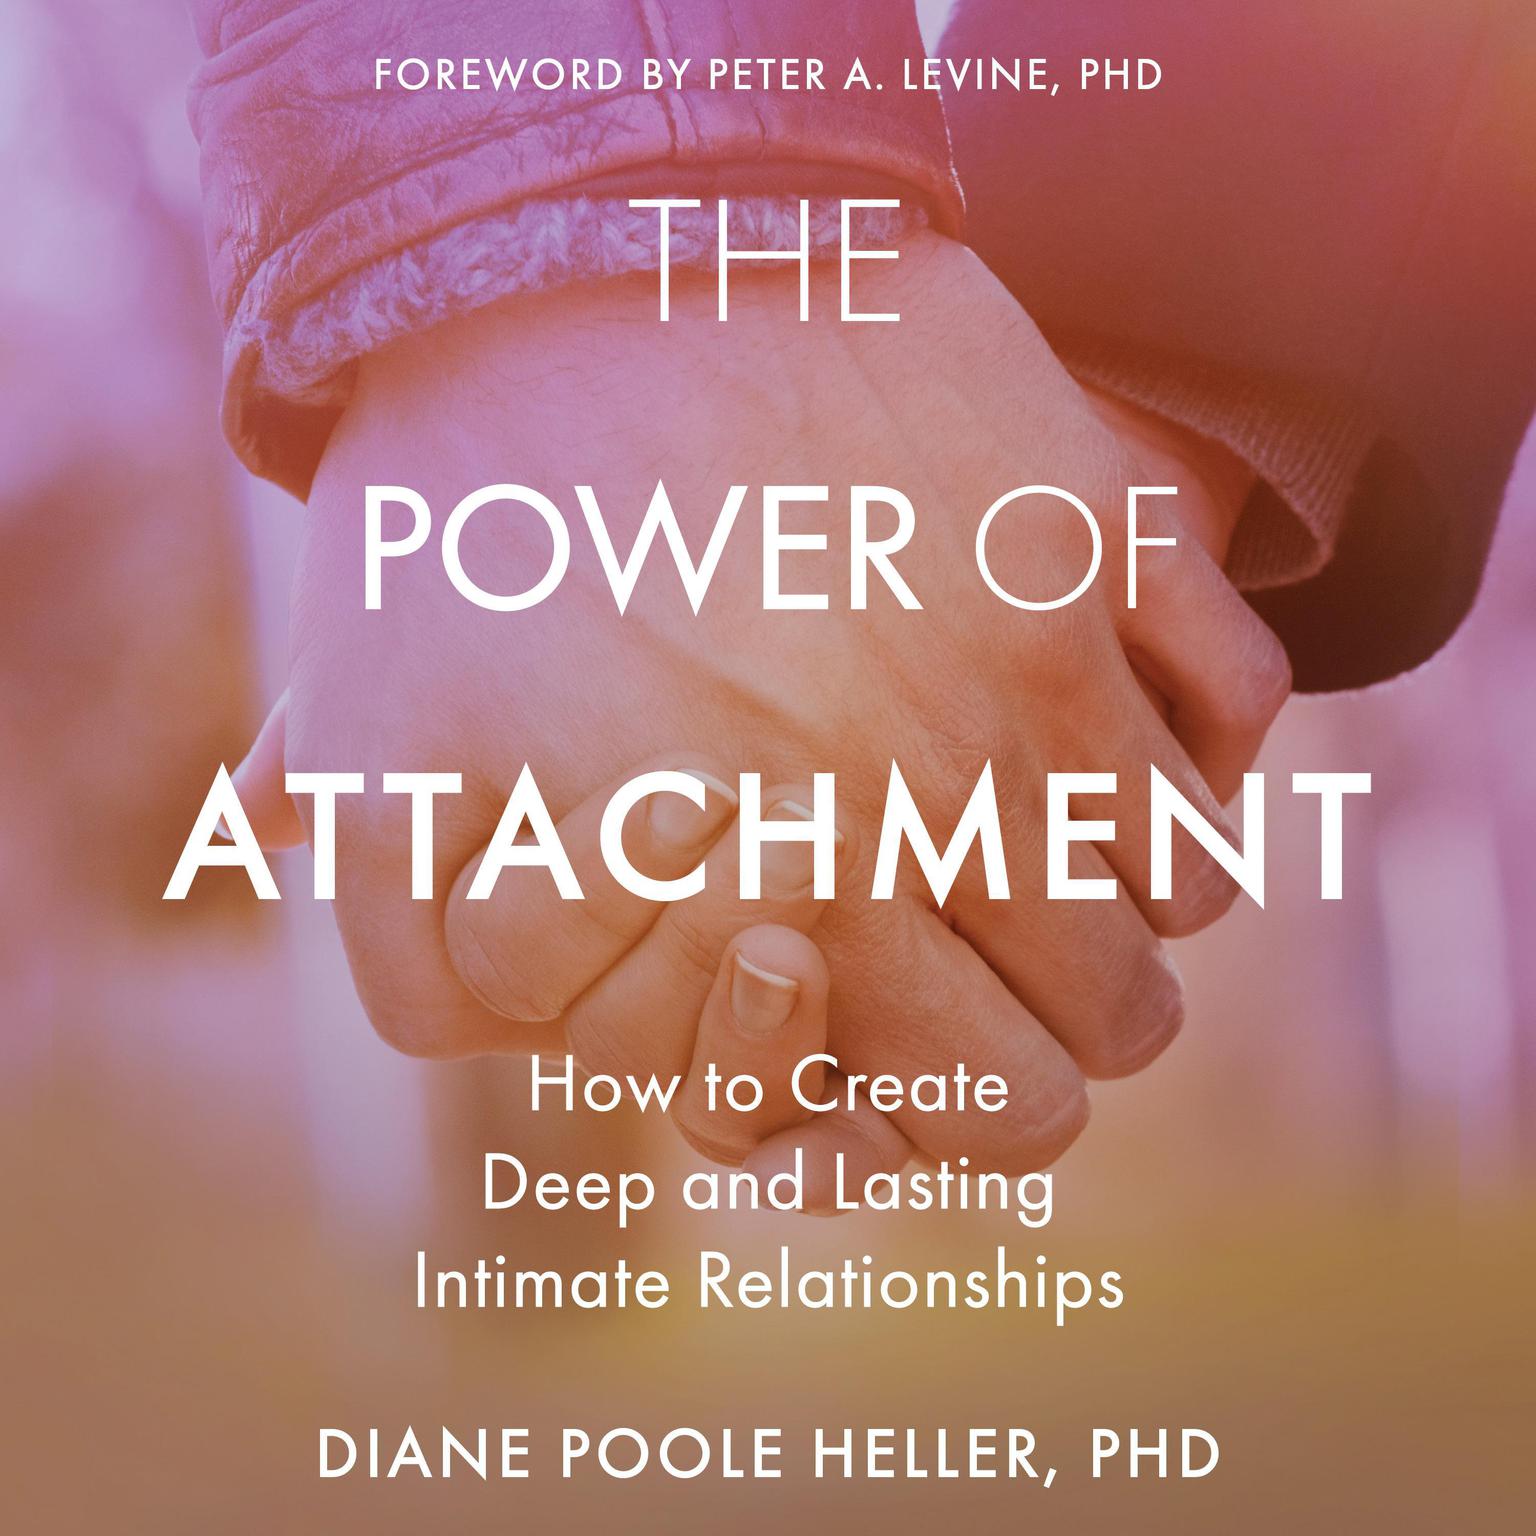 The Power of Attachment: How to Create Deep and Lasting Intimate Relationships Audiobook, by Diane Poole Heller